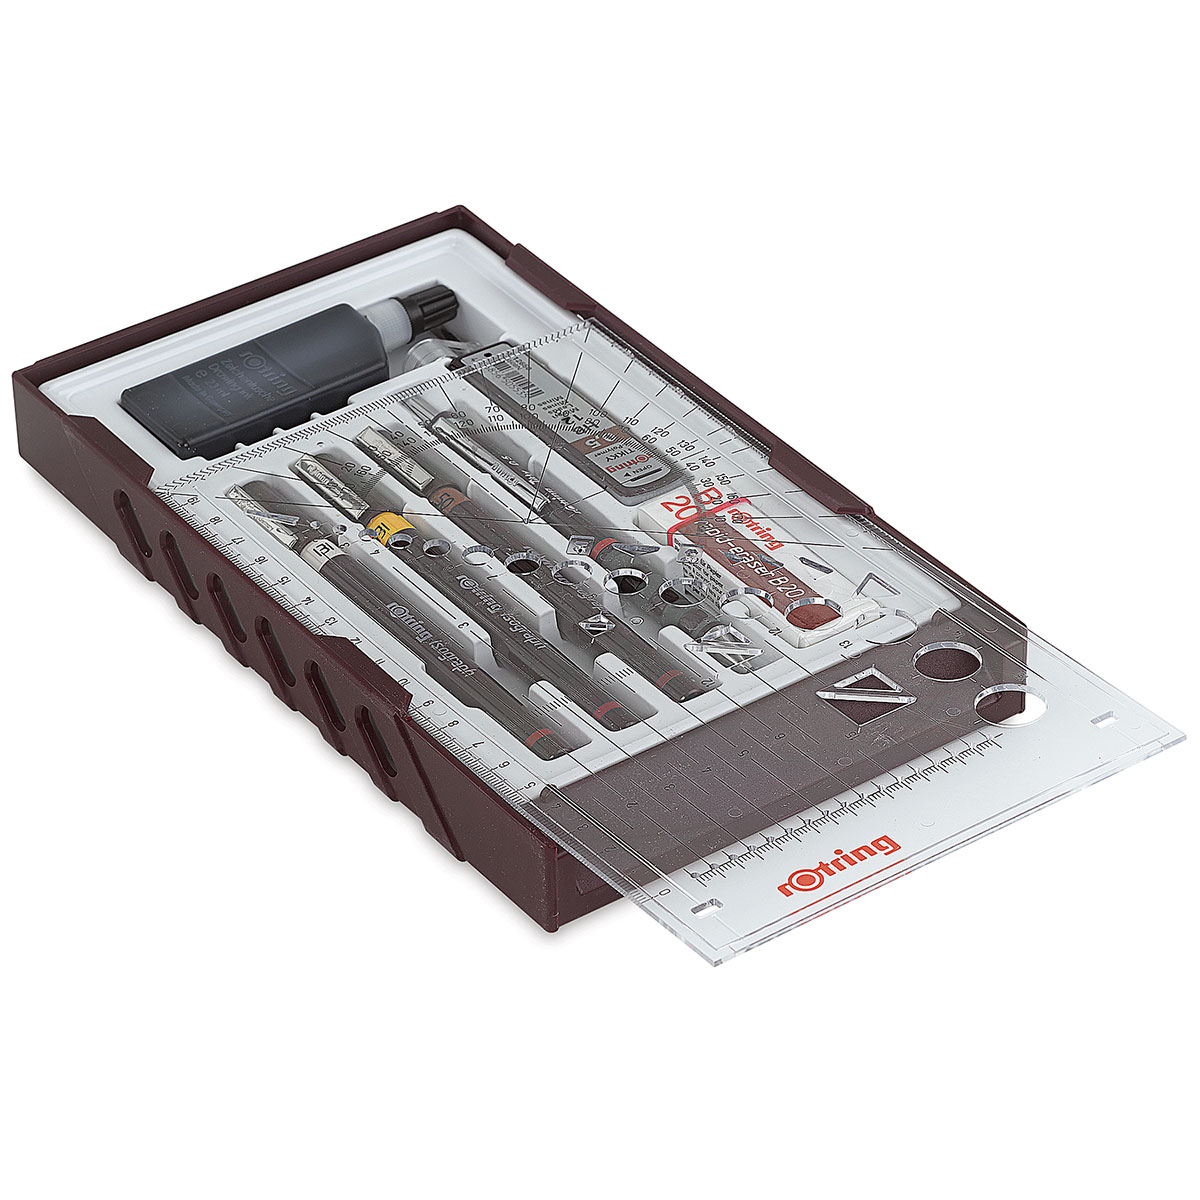 Rotring Isograph Technical Pen College Set - 0.25mm, 0.35mm, 0.5mm, Set of 3 - image 1 of 5